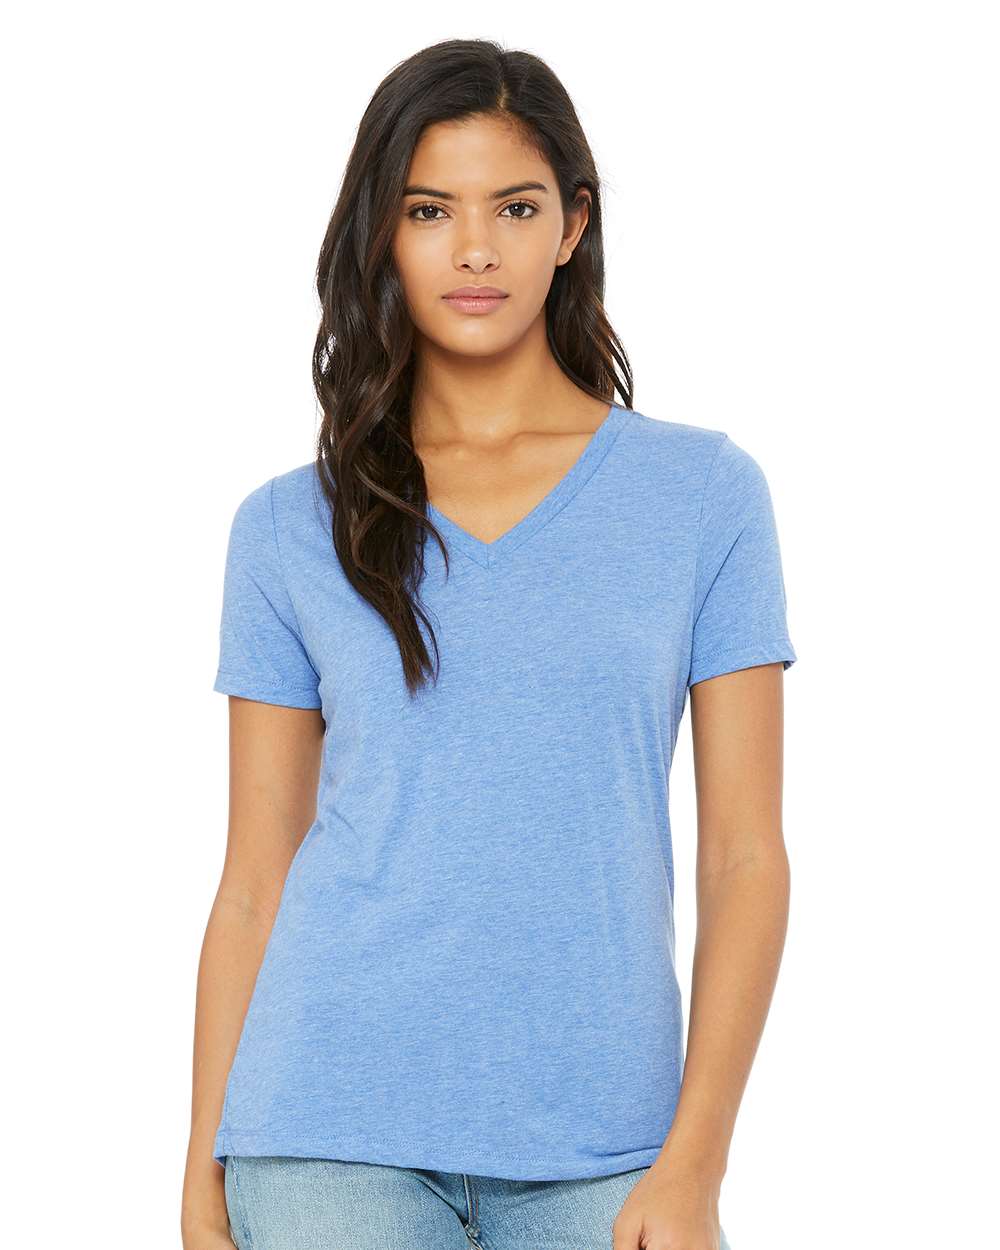 BELLA + CANVAS - Women's Relaxed Triblend Short Sleeve V-Neck Tee - 6415